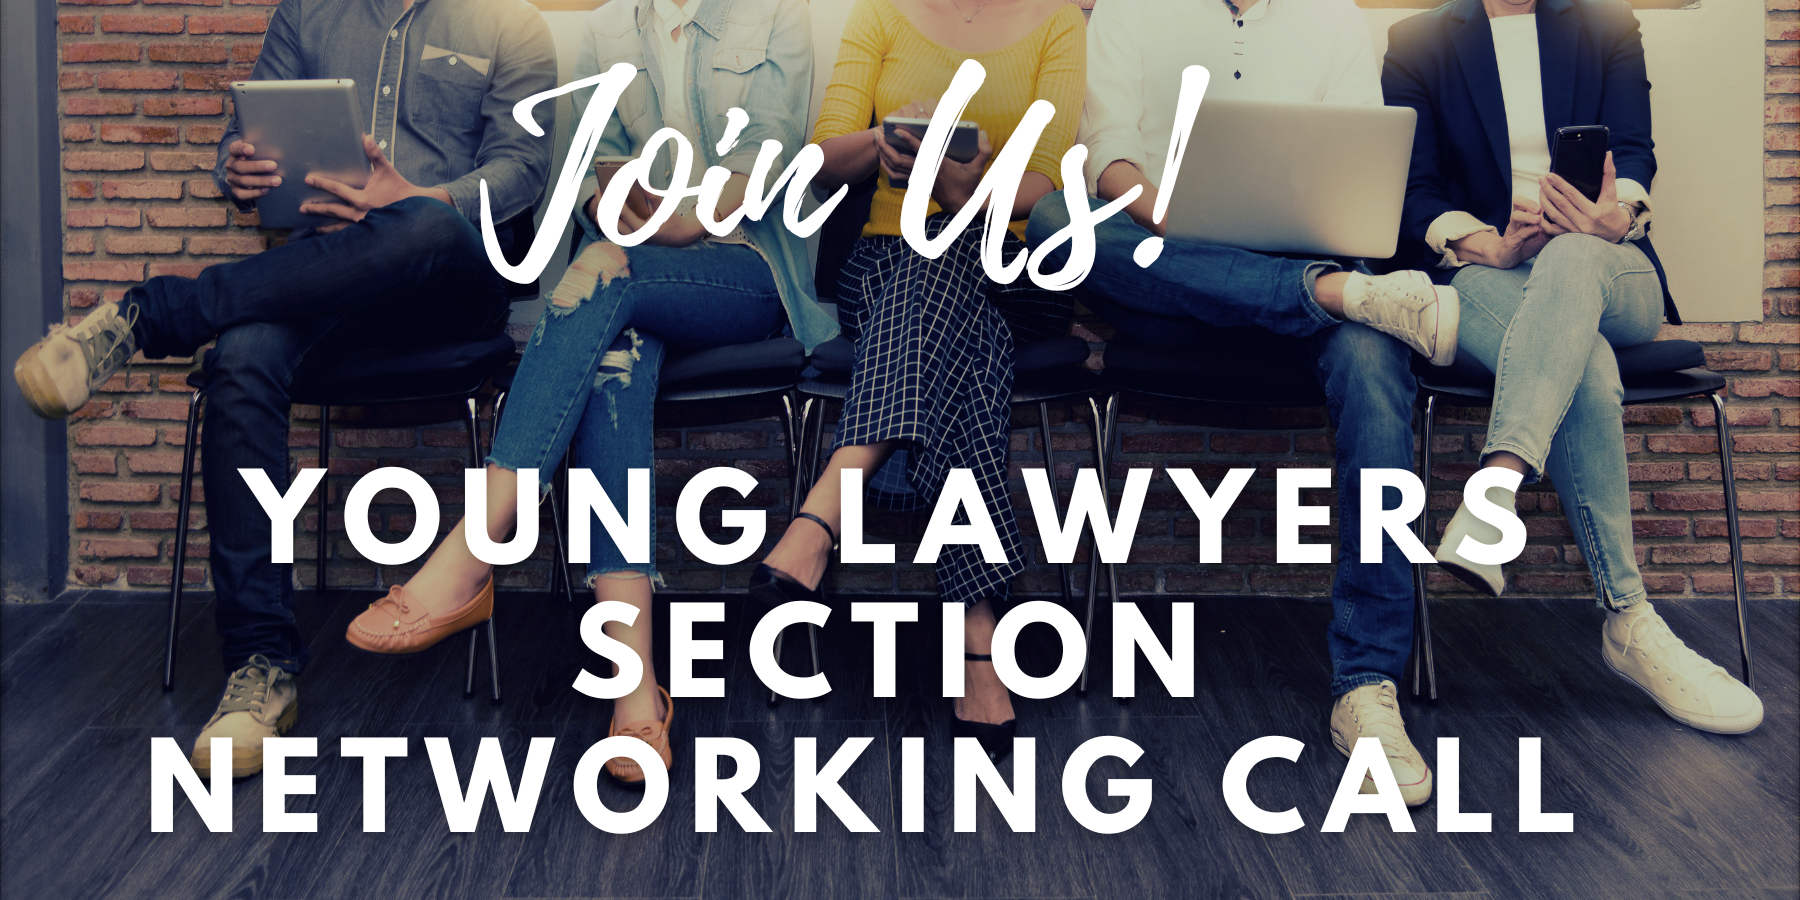 Young Lawyers Section